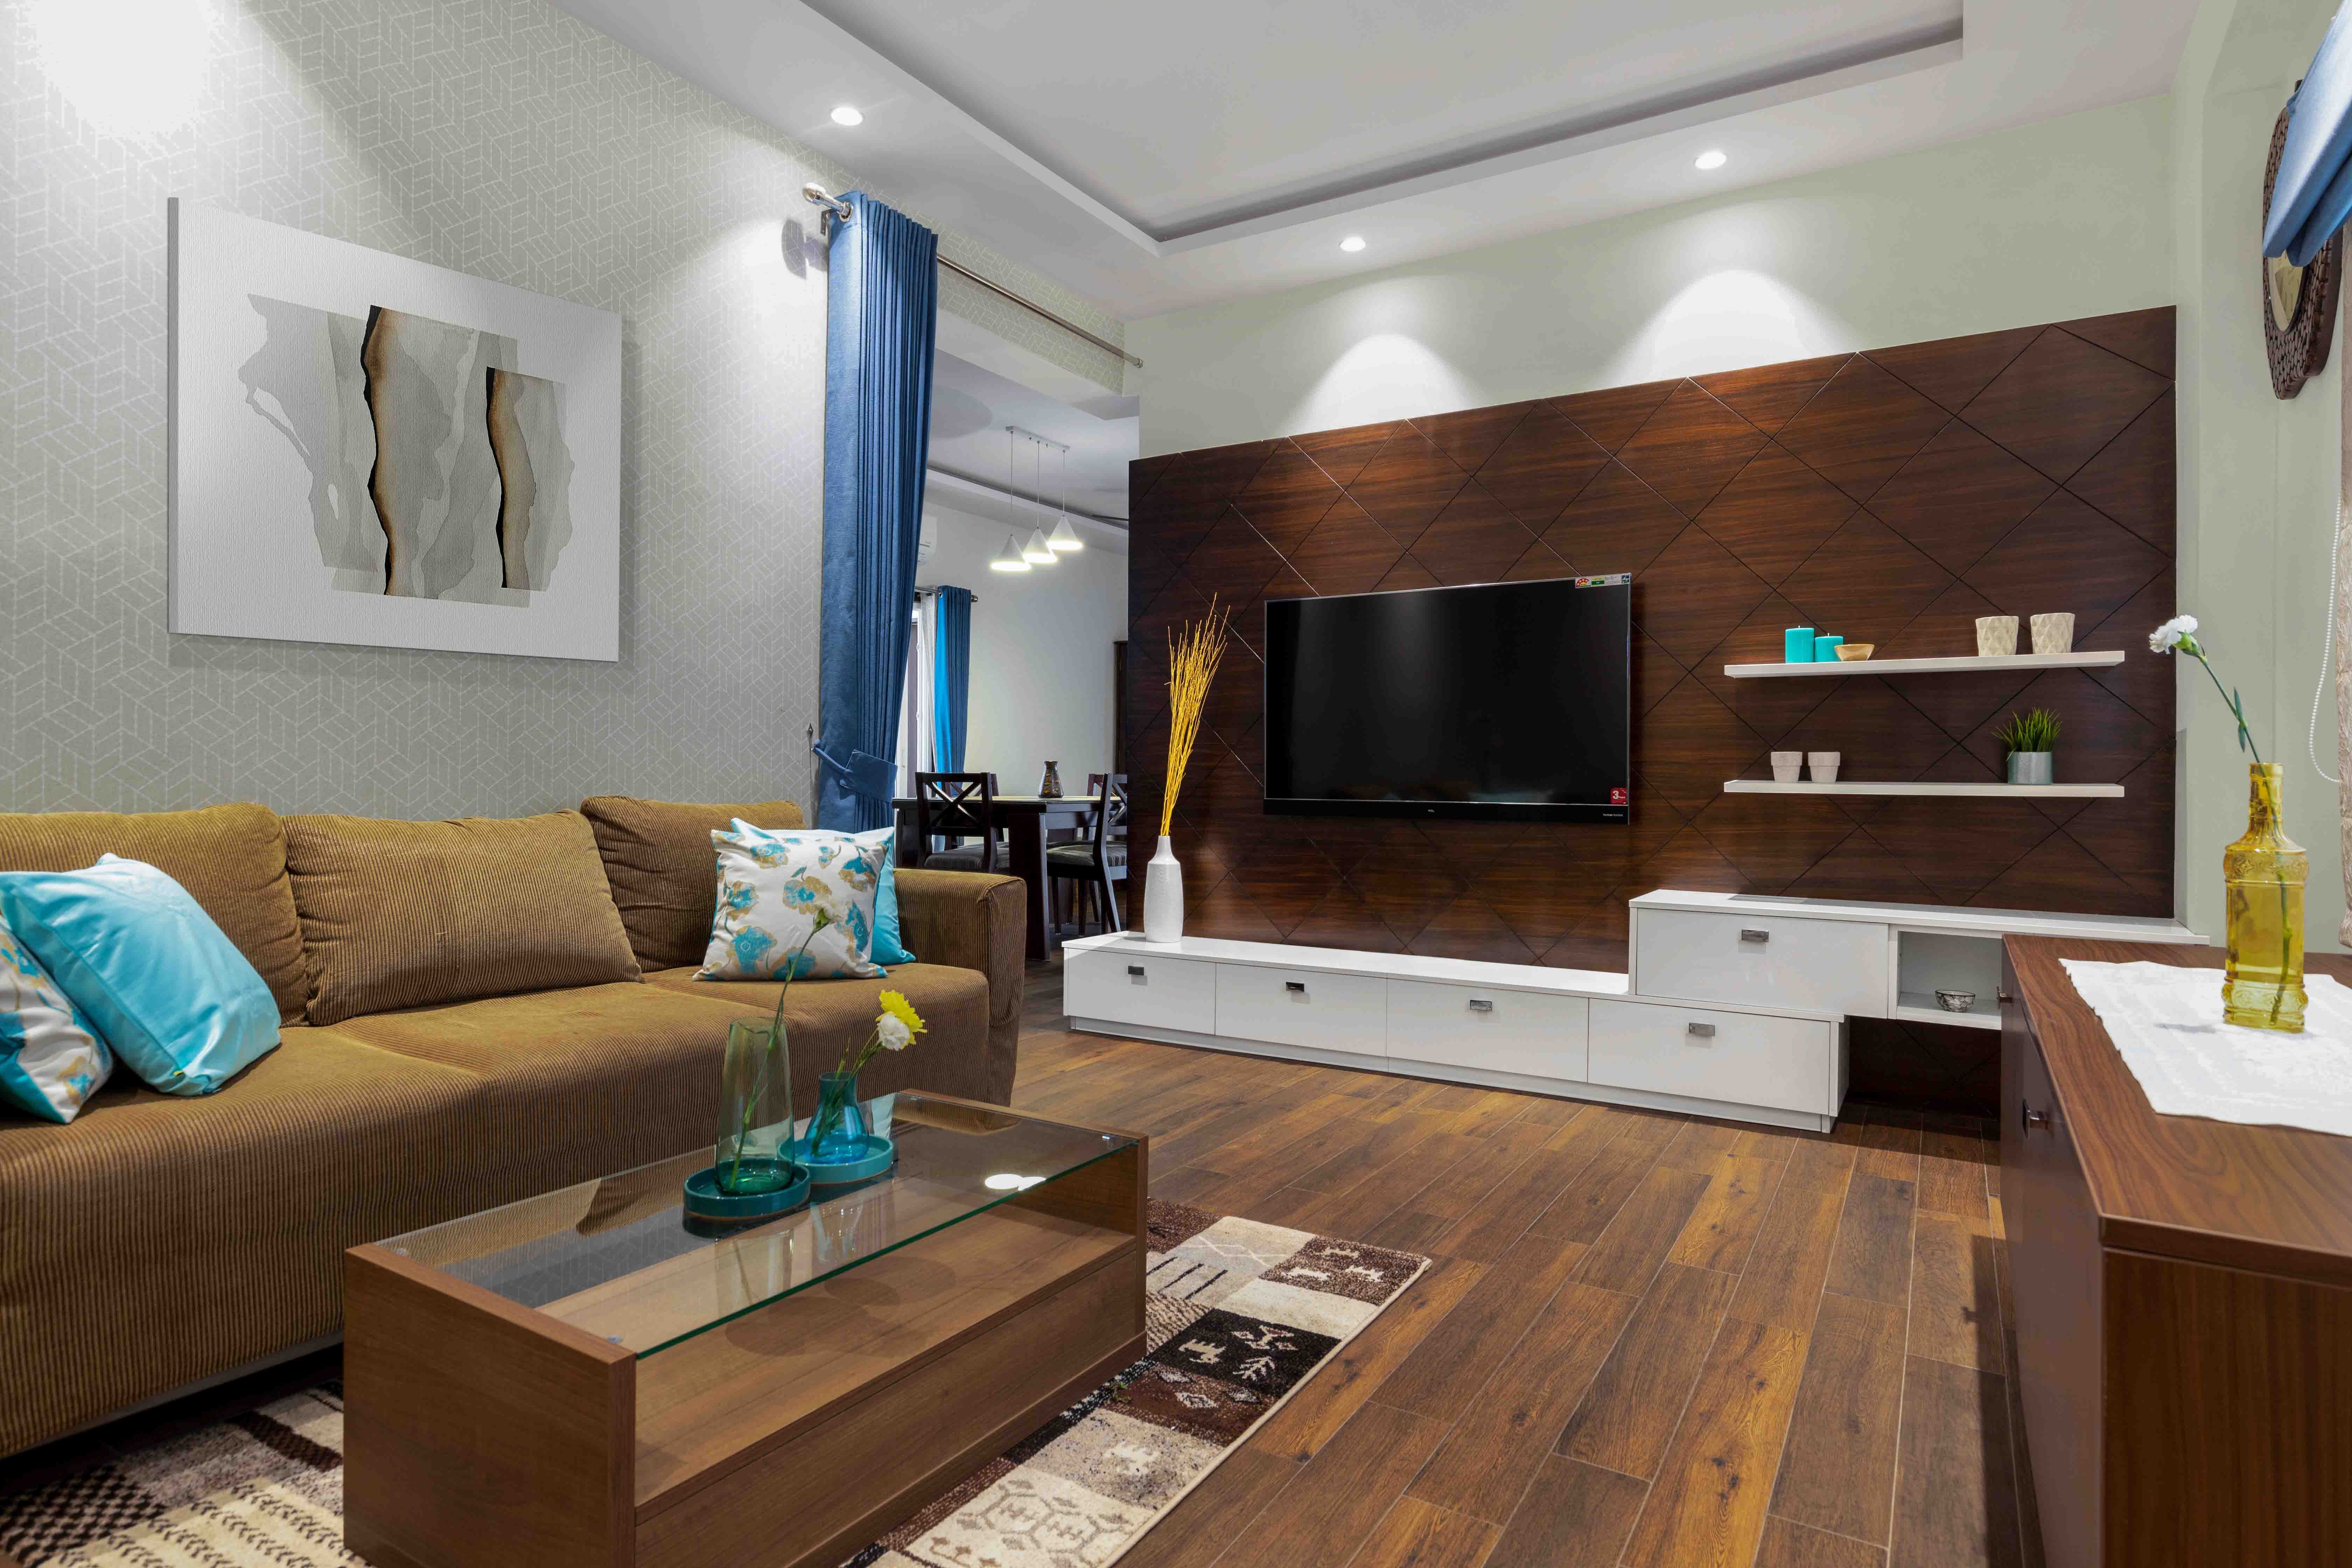 Contemporary 2-BHK Flat Design In Hyderabad With Yellow And White Guest Room Design